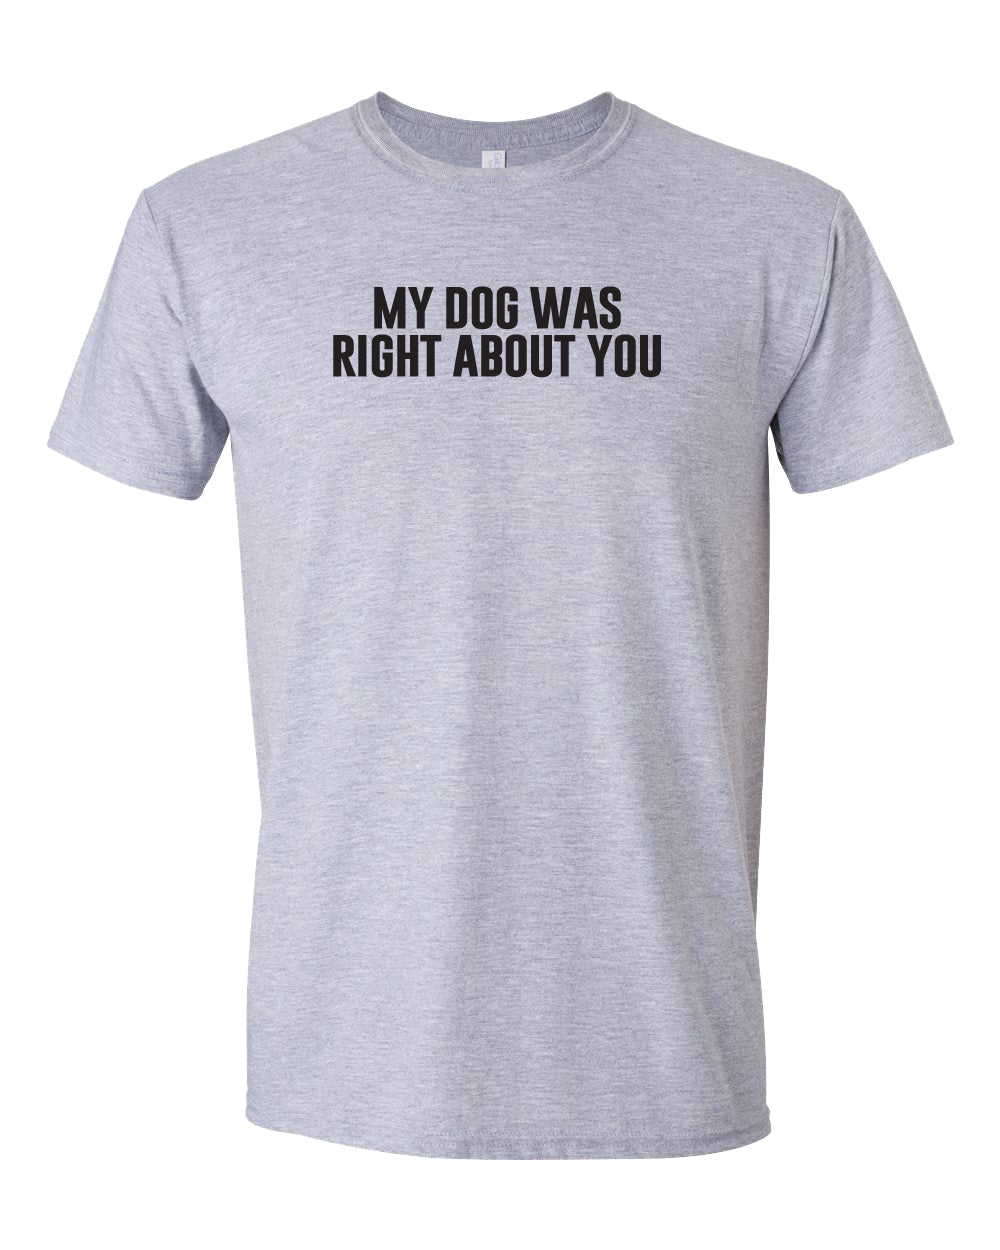 My Dog Was Right About You - Short Sleeve Tshirt